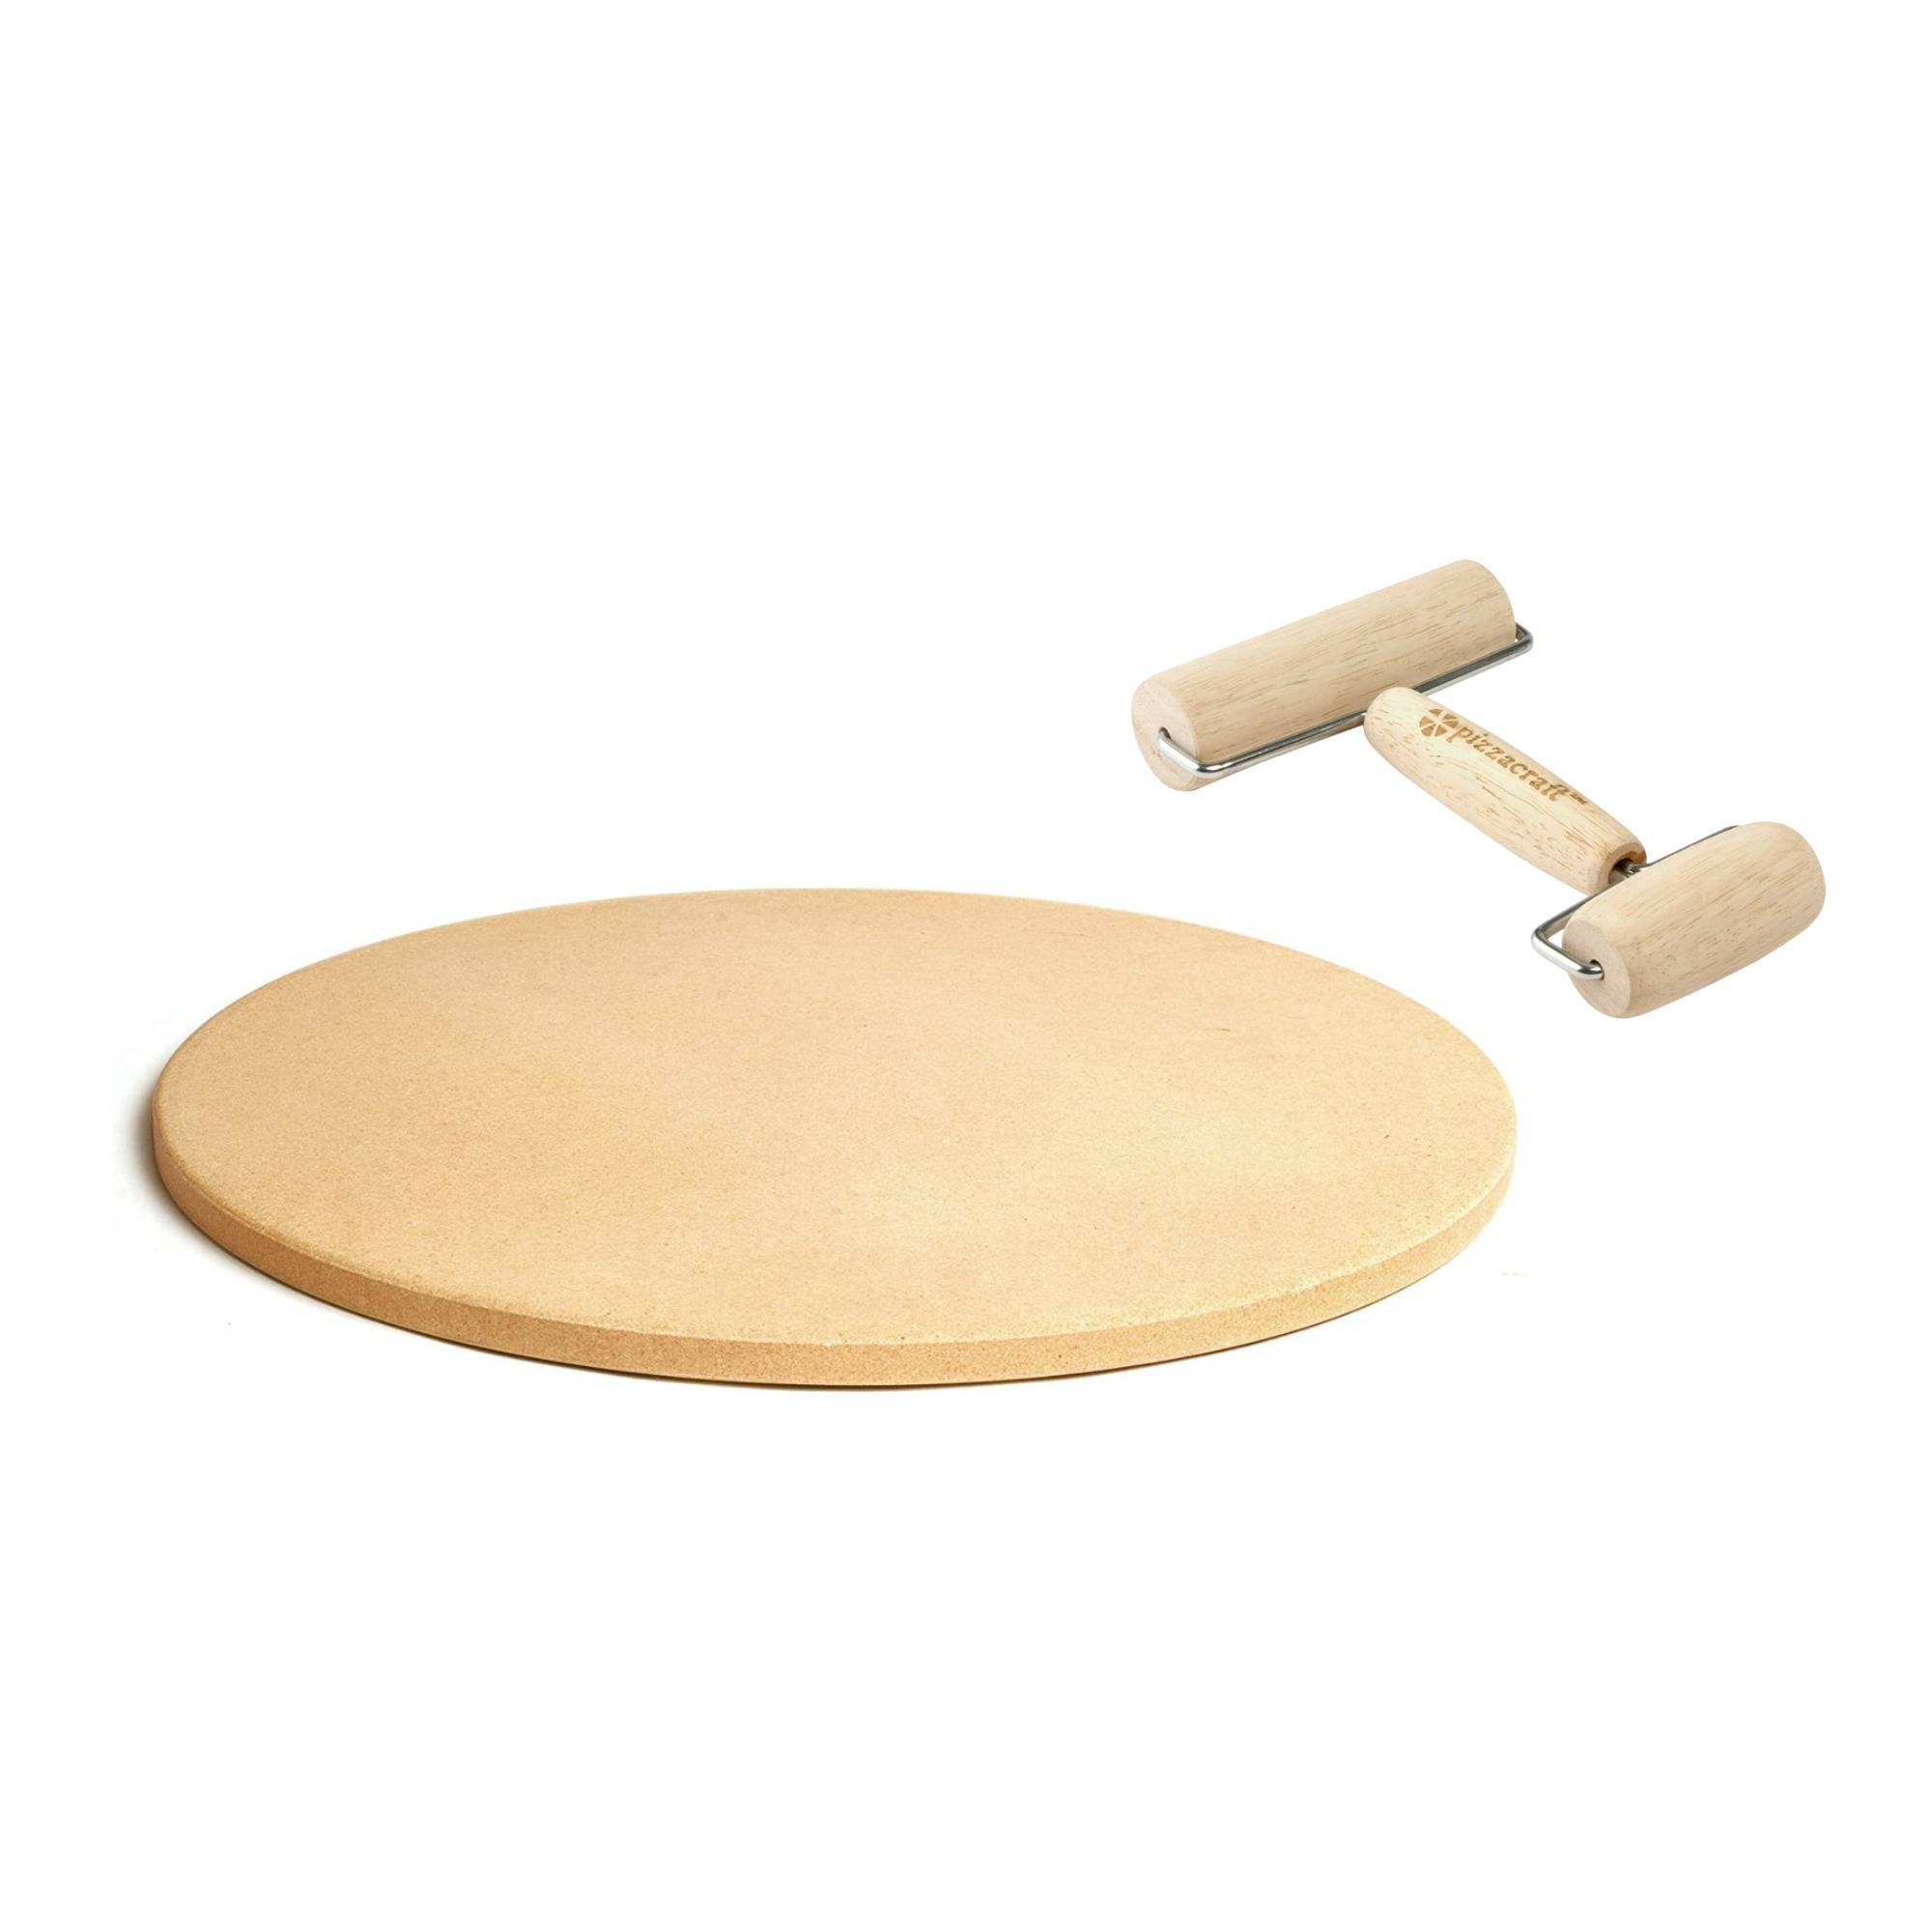 Pizzacraft PC0212 Hardwood Double Dough Roller with Round ThermaBond Baking/Pizza Stone